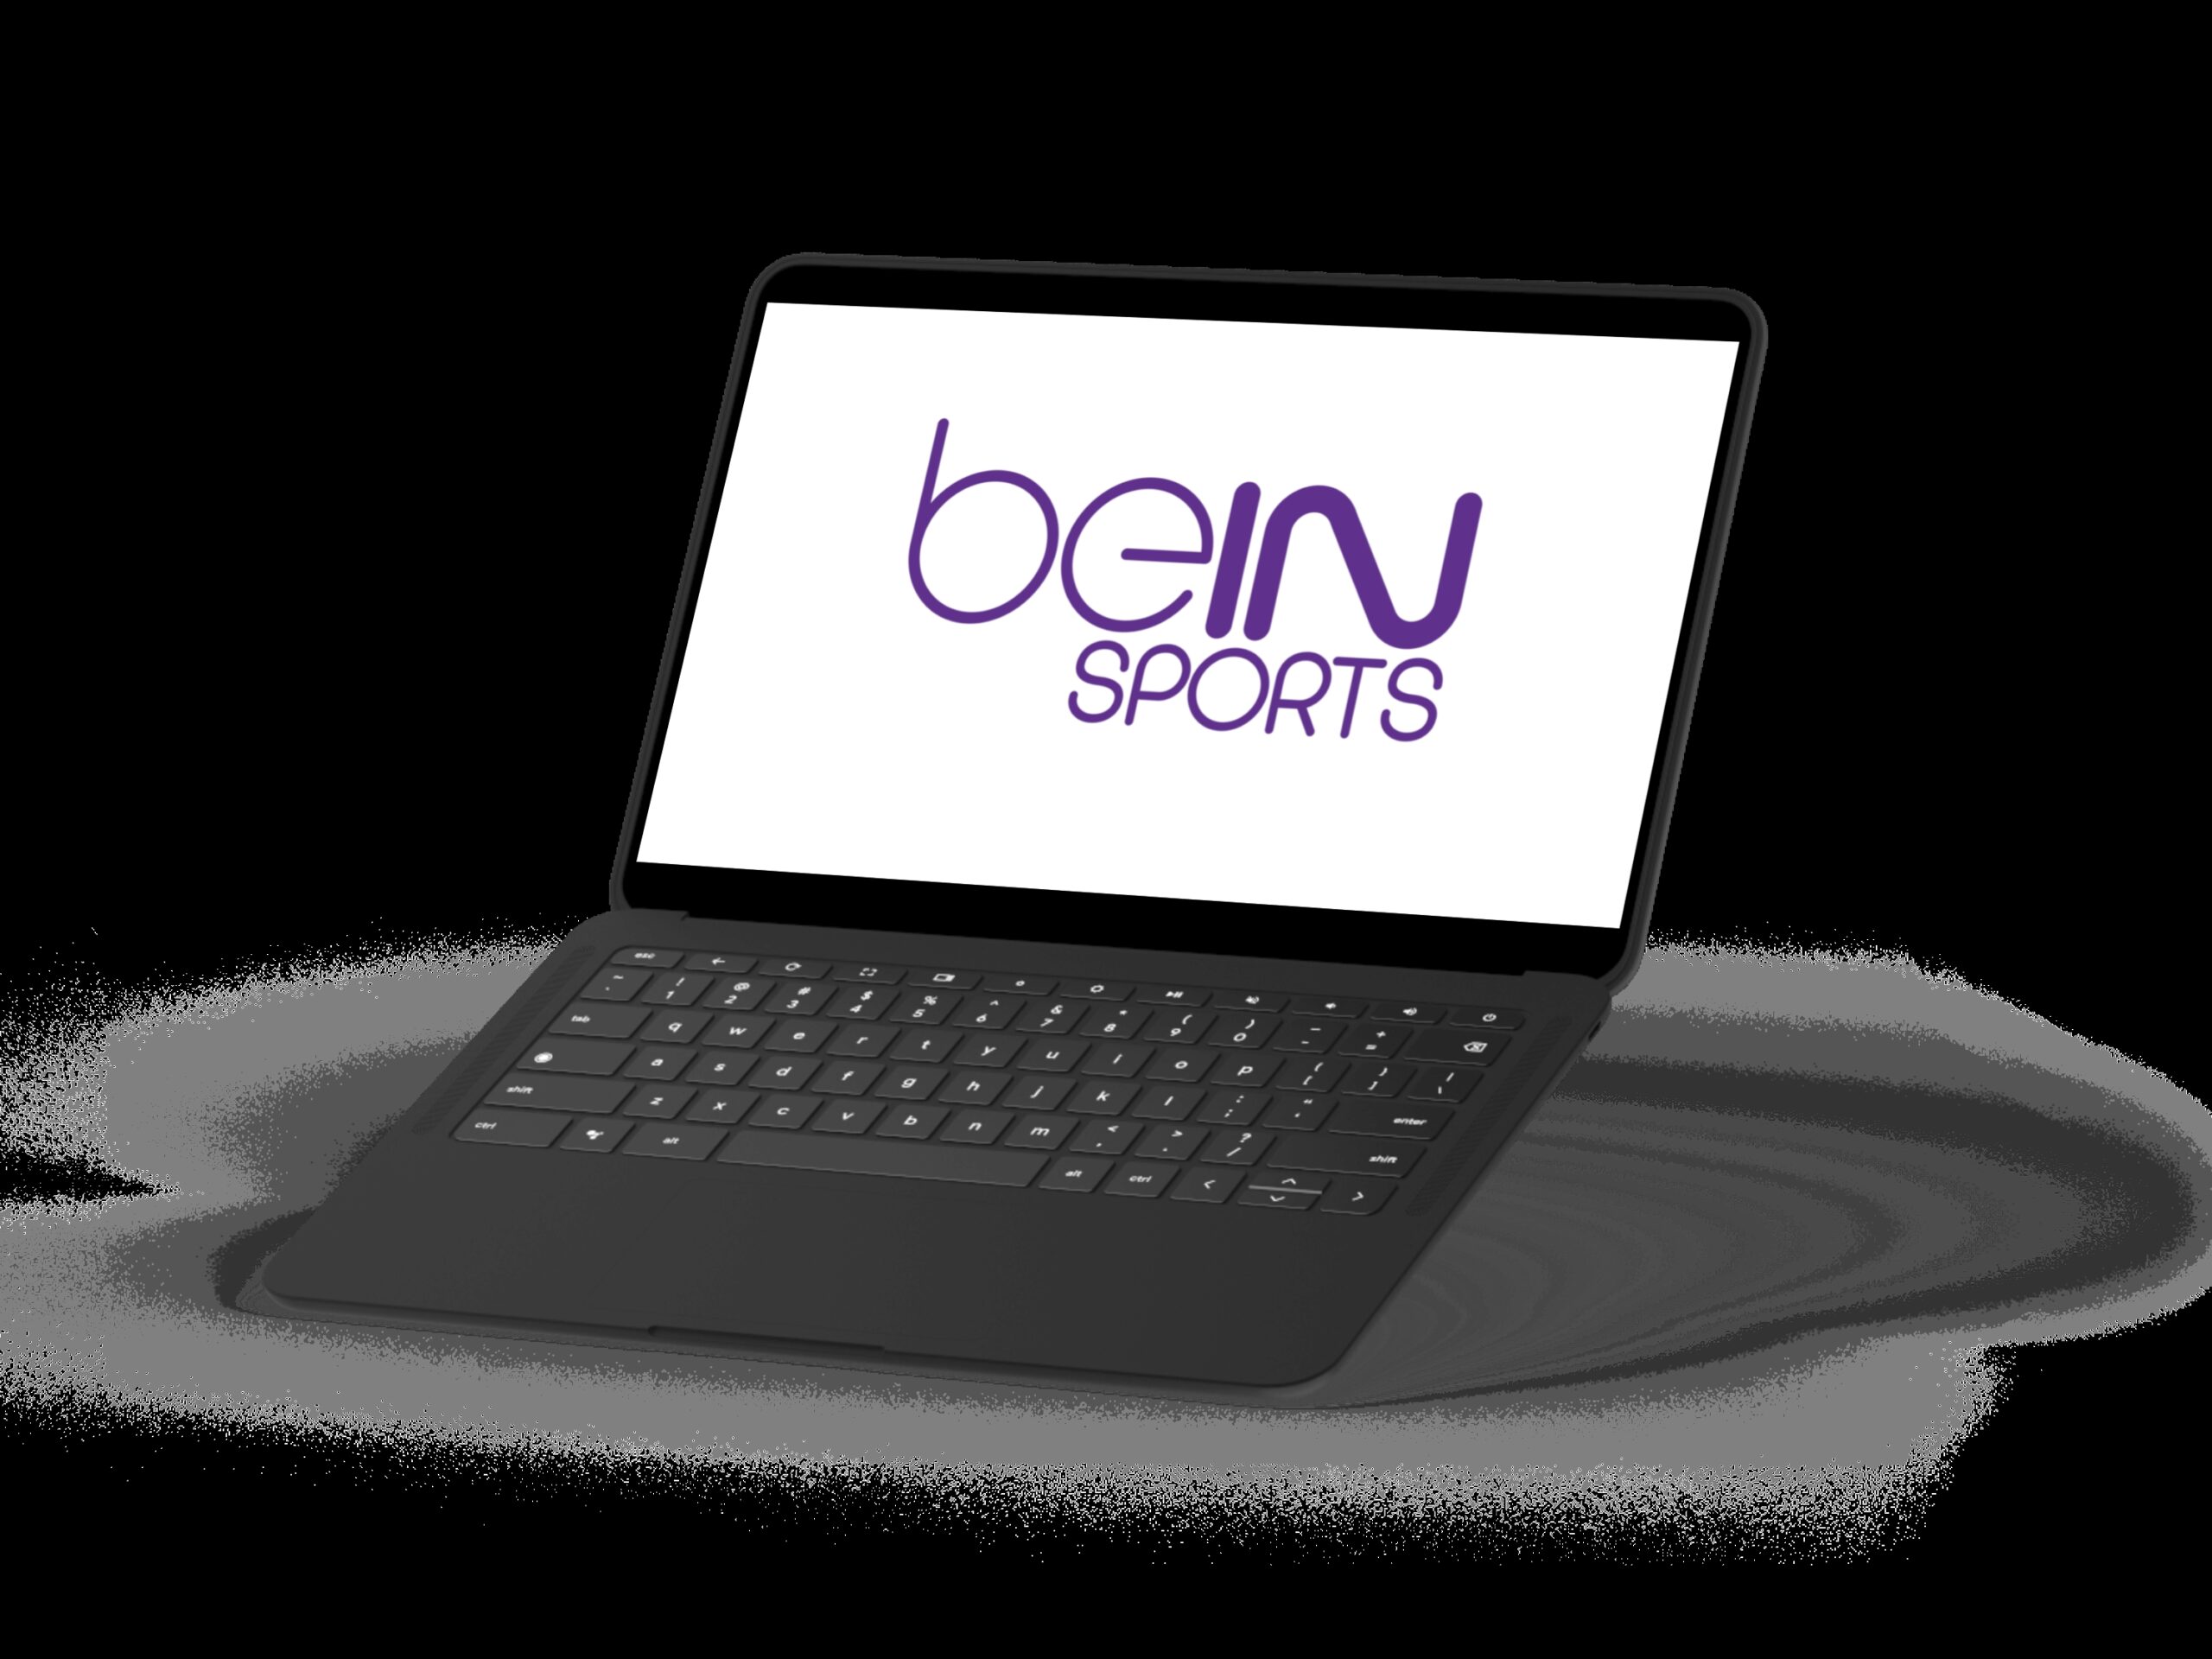 How to watch beIN Sports